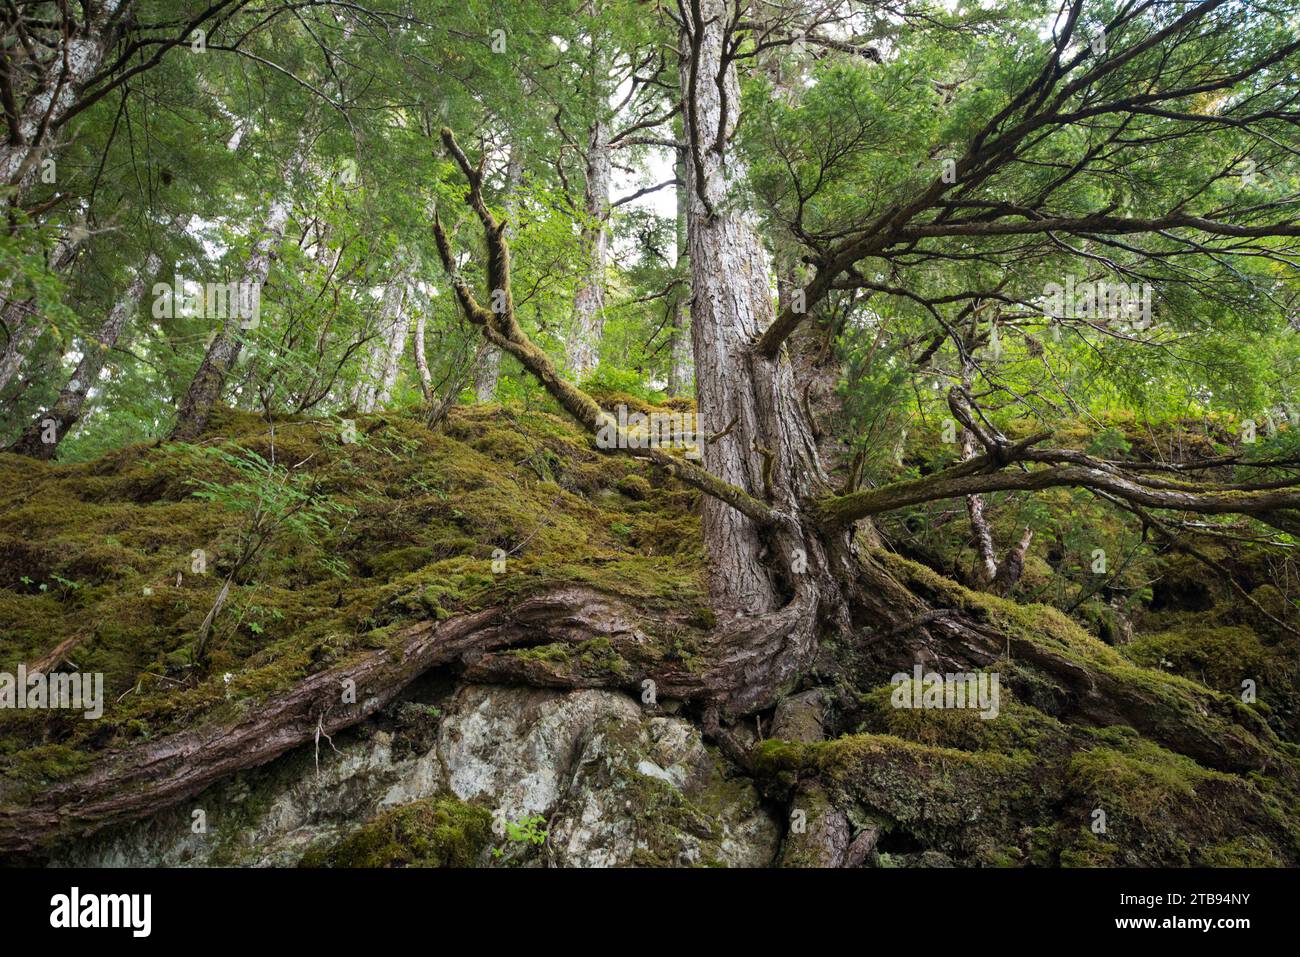 Sitka spruce tree (Picea sitchensis) with root system in rock and moss, on a trail to Lake Eva; Inside Passage, Alaska, United States of America Stock Photo